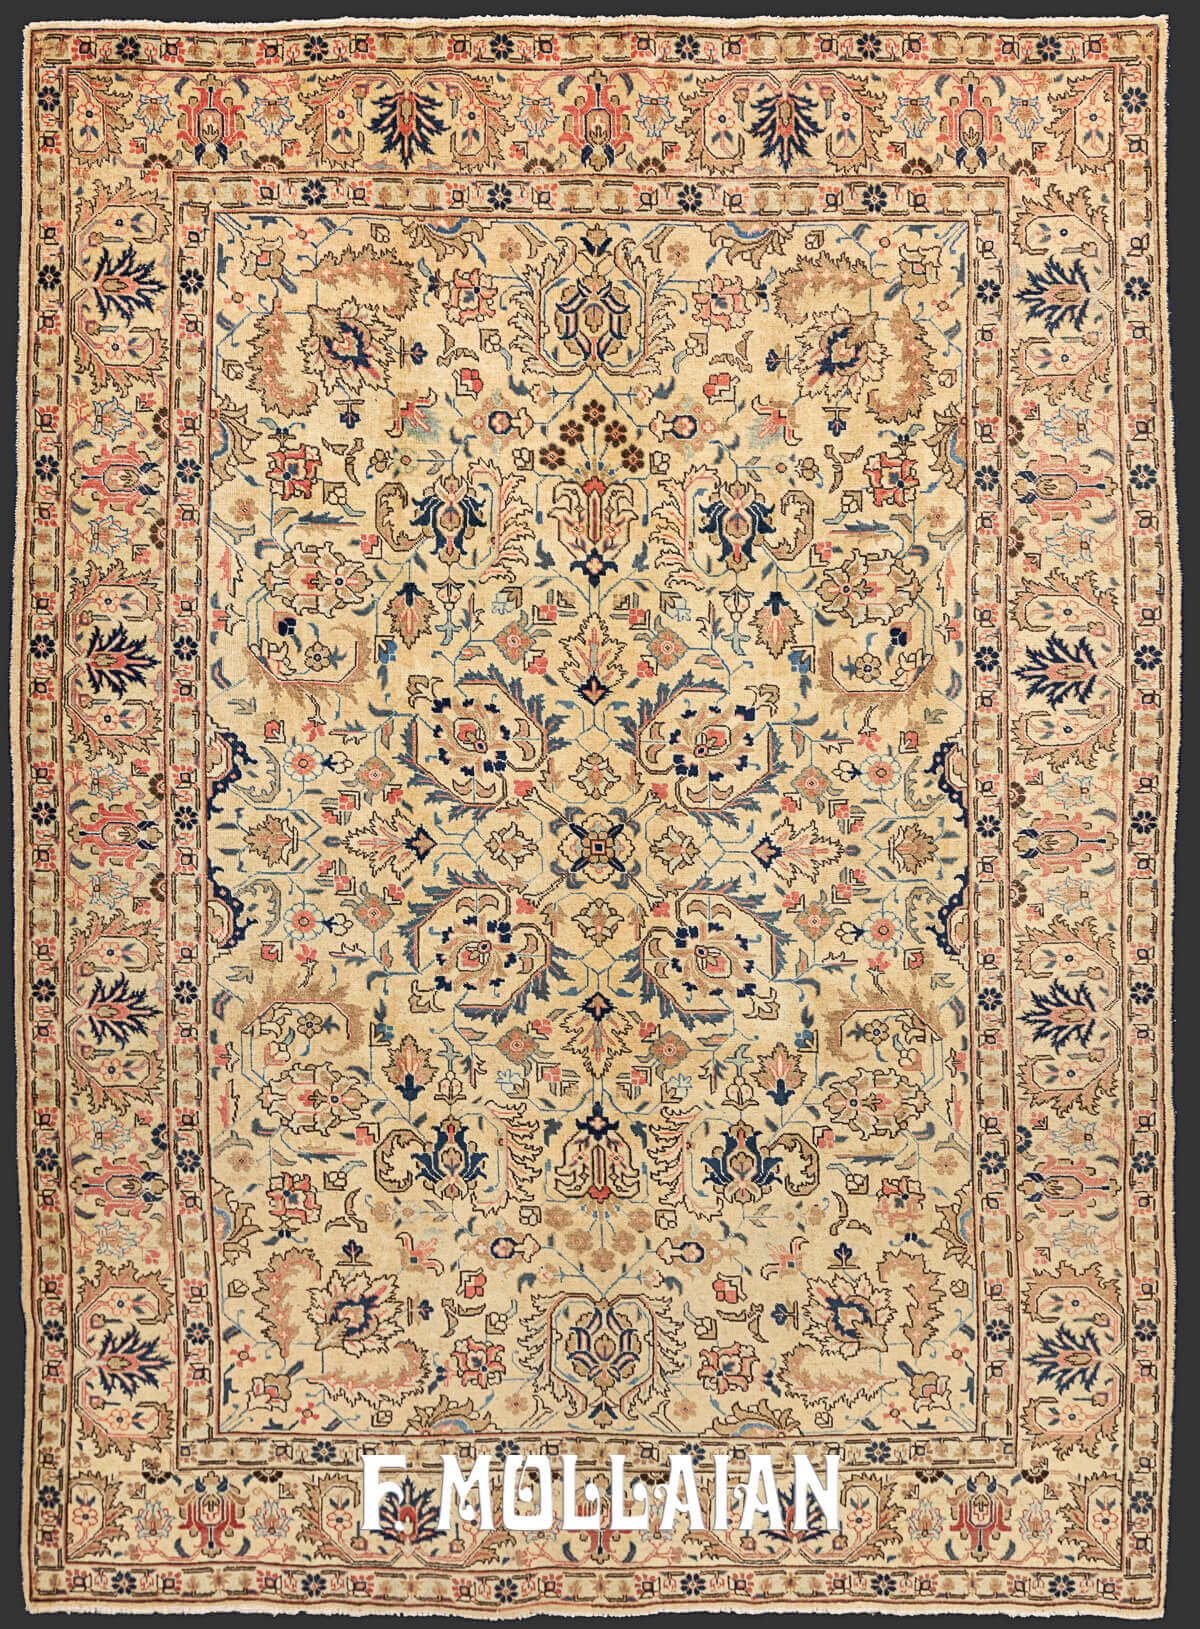 Hand-Knotted Antique Persian Tabriz Khoy Carpet n°:54628707